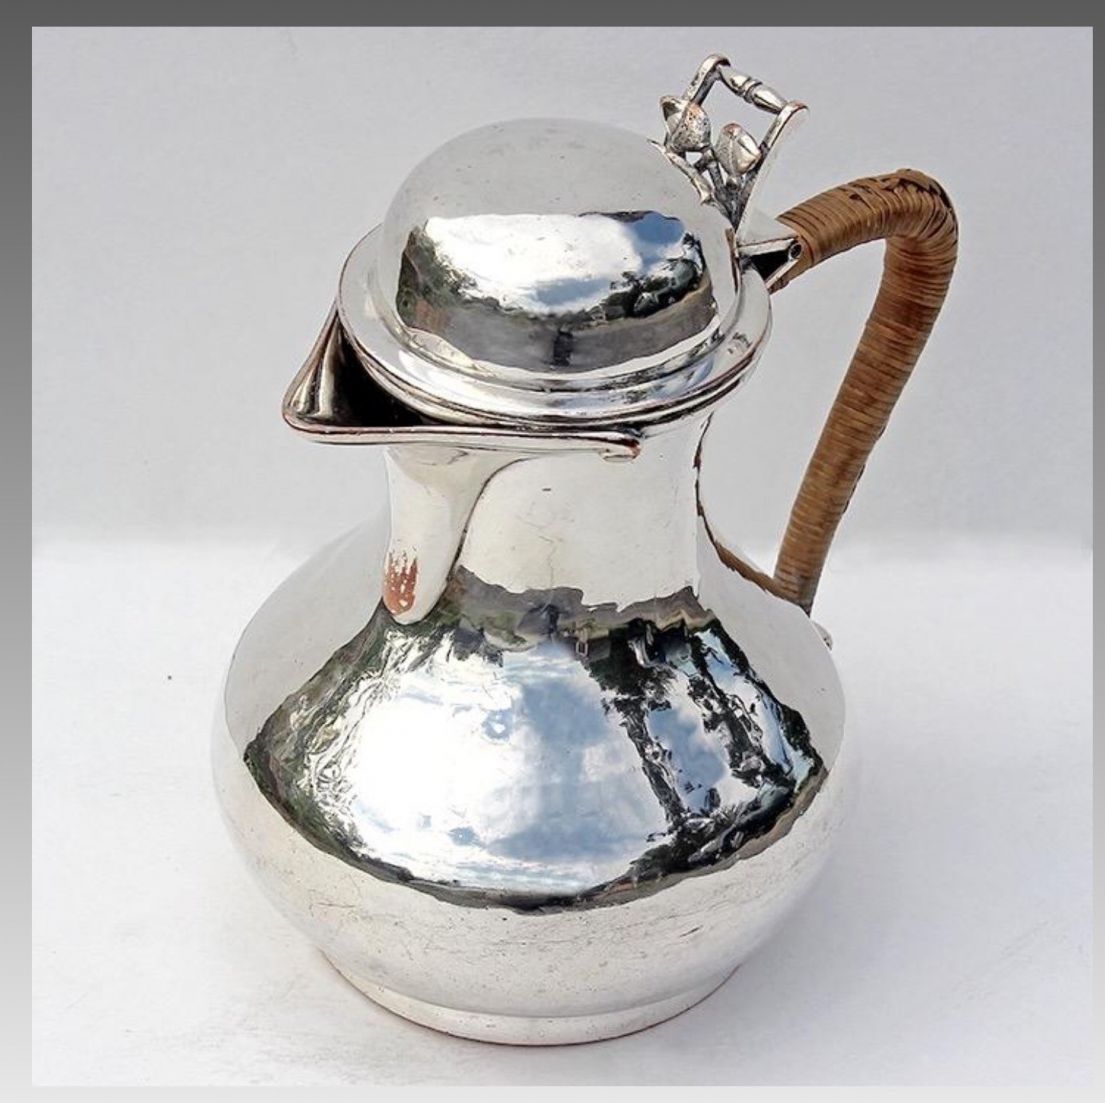 A hammered silver jug, with a lid that can flip up. The handle appears to have woven material around it so it can be lifted even when the jug is hot.